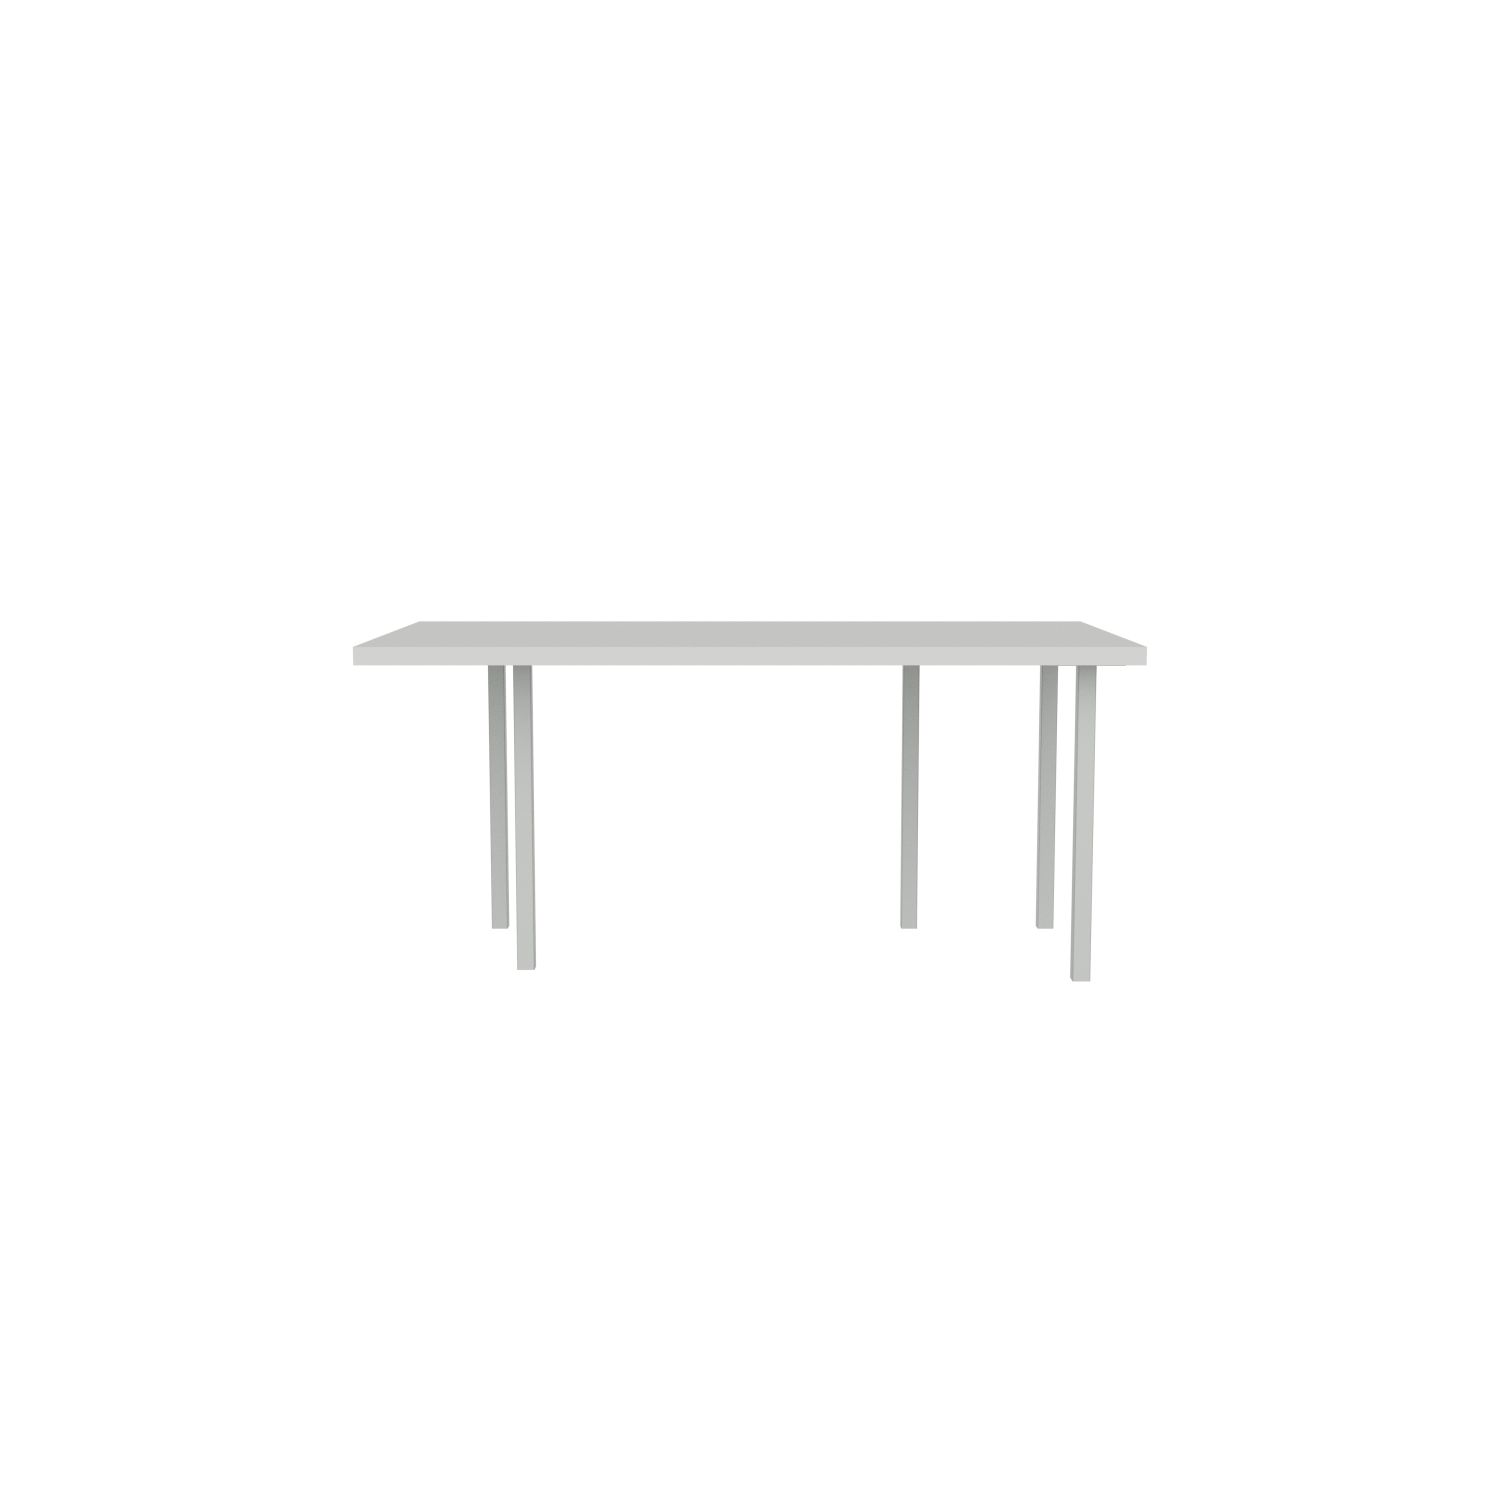 lensvelt bbrand table five fixed heigt 915x172 hpl boring grey 50 mm price level 1 light grey ral7035